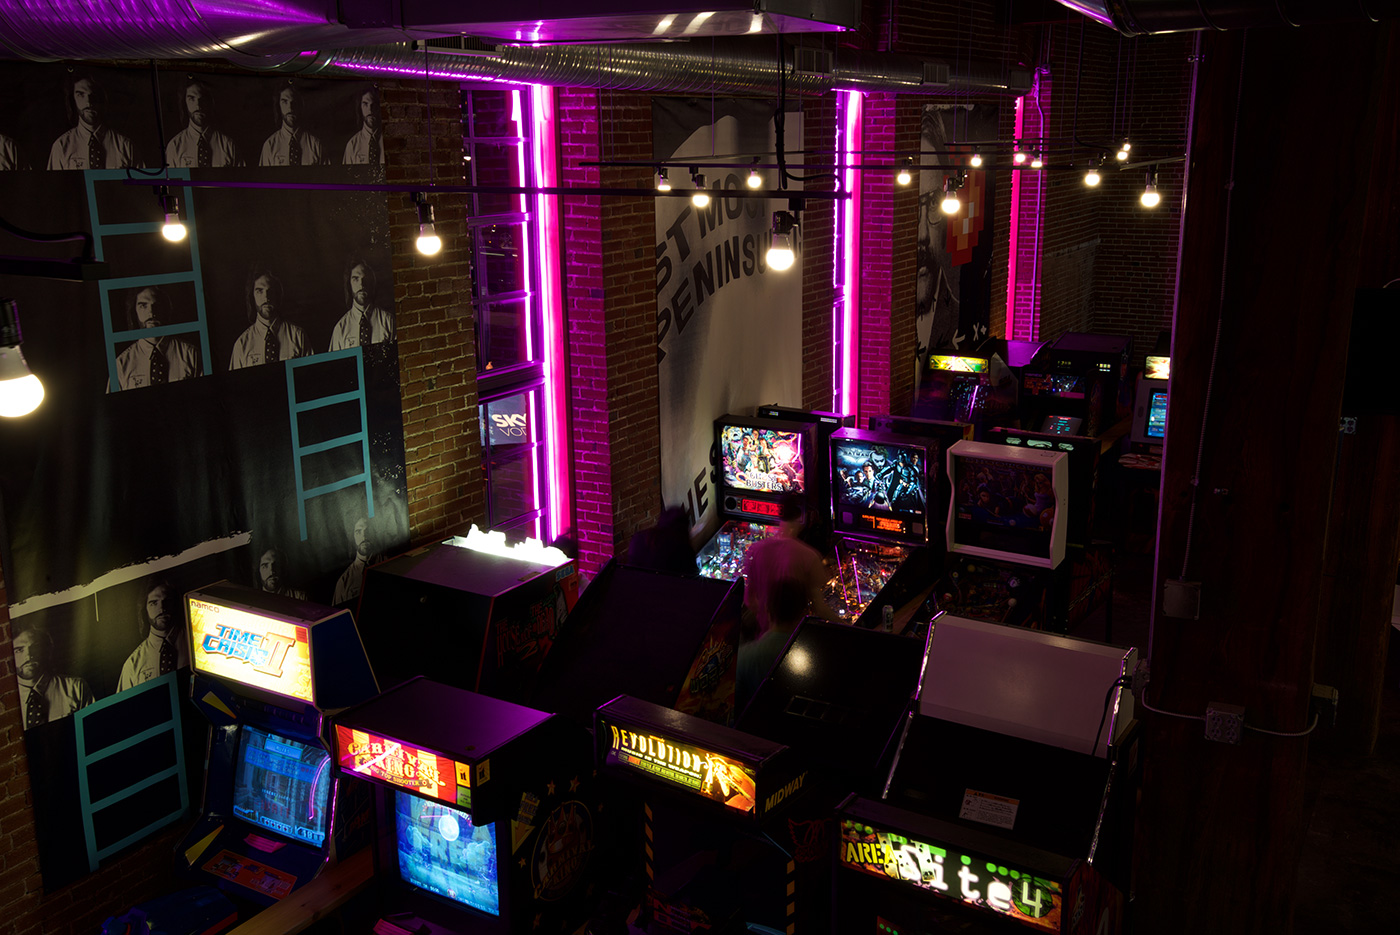 The neon lights and grunge banners above the arcade cabinets at Start Bar